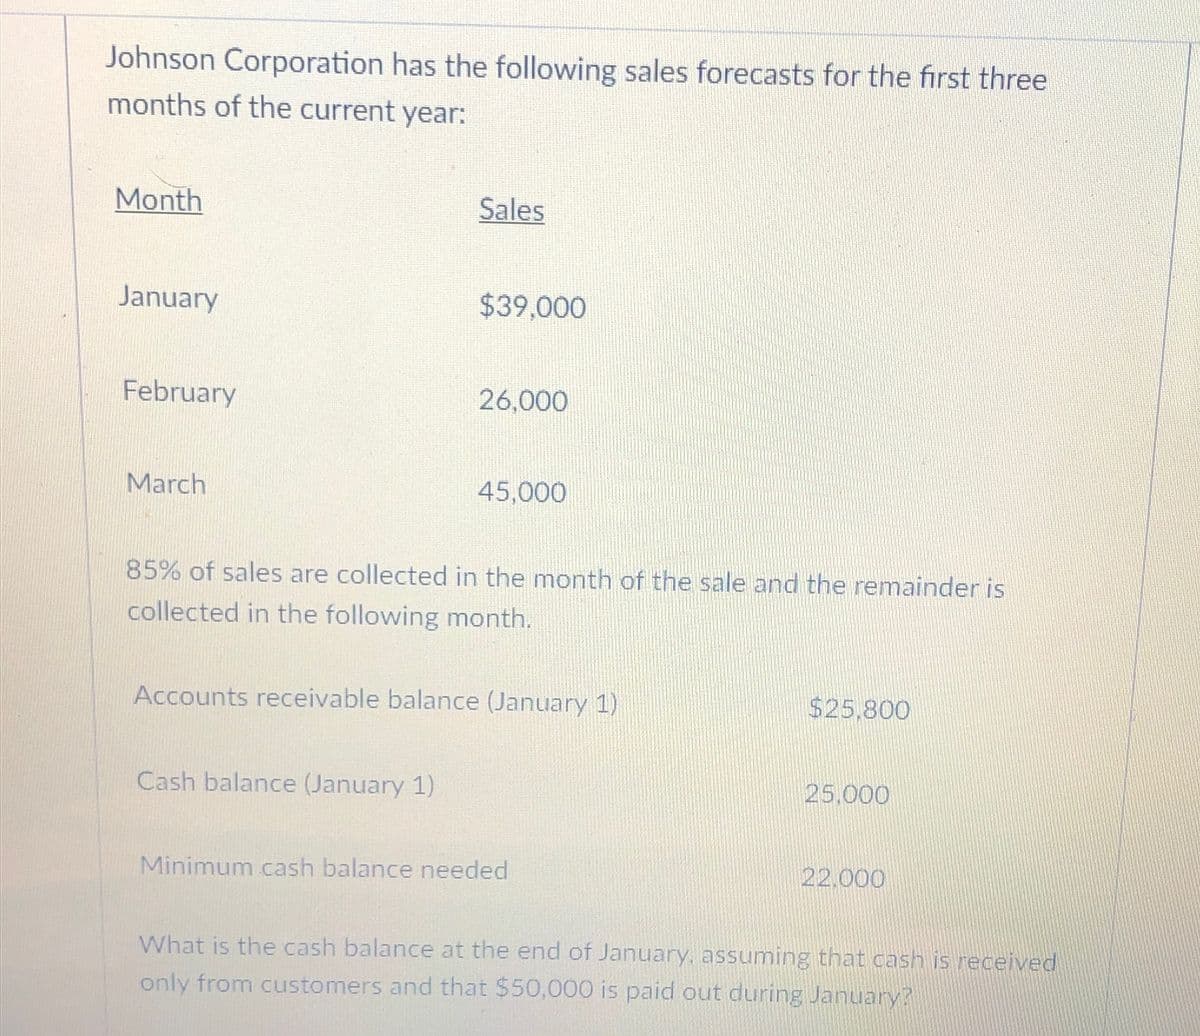 Johnson Corporation has the following sales forecasts for the first three
months of the current year:
Month
Sales
January
$39,000
February
26,000
March
45,000
85% of sales are collected in the month of the sale and the remainder is
collected in the following month.
Accounts receivable balance (January 1)
Cash balance (January 1)
Minimum cash balance needed
$25.800
25.000
22.000
What is the cash balance at the end of January, assuming that cash is received
only from customers and that $50,000 is paid out during January?